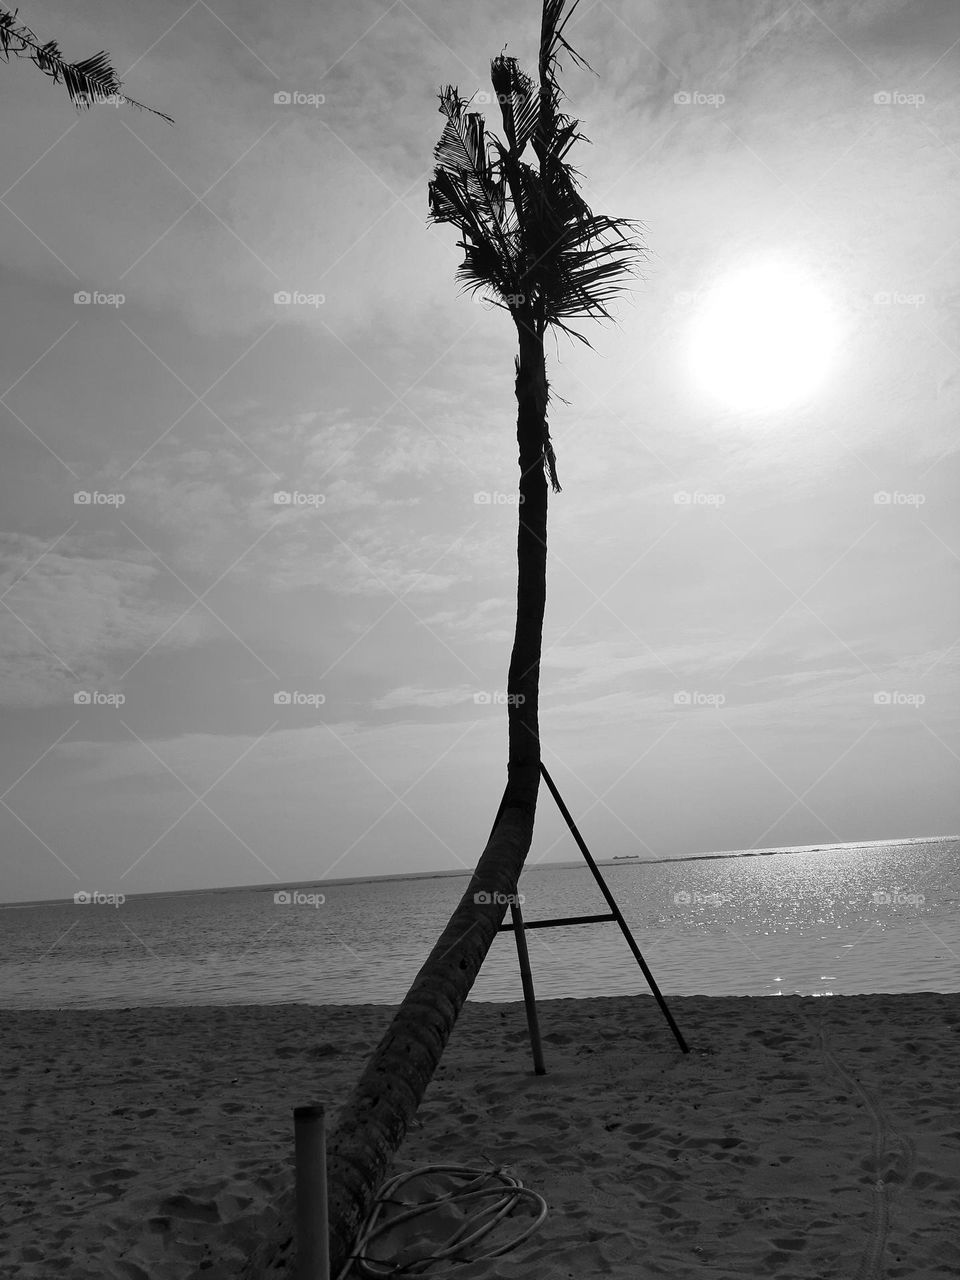 A perfect shot of coconut tree in a fine art style